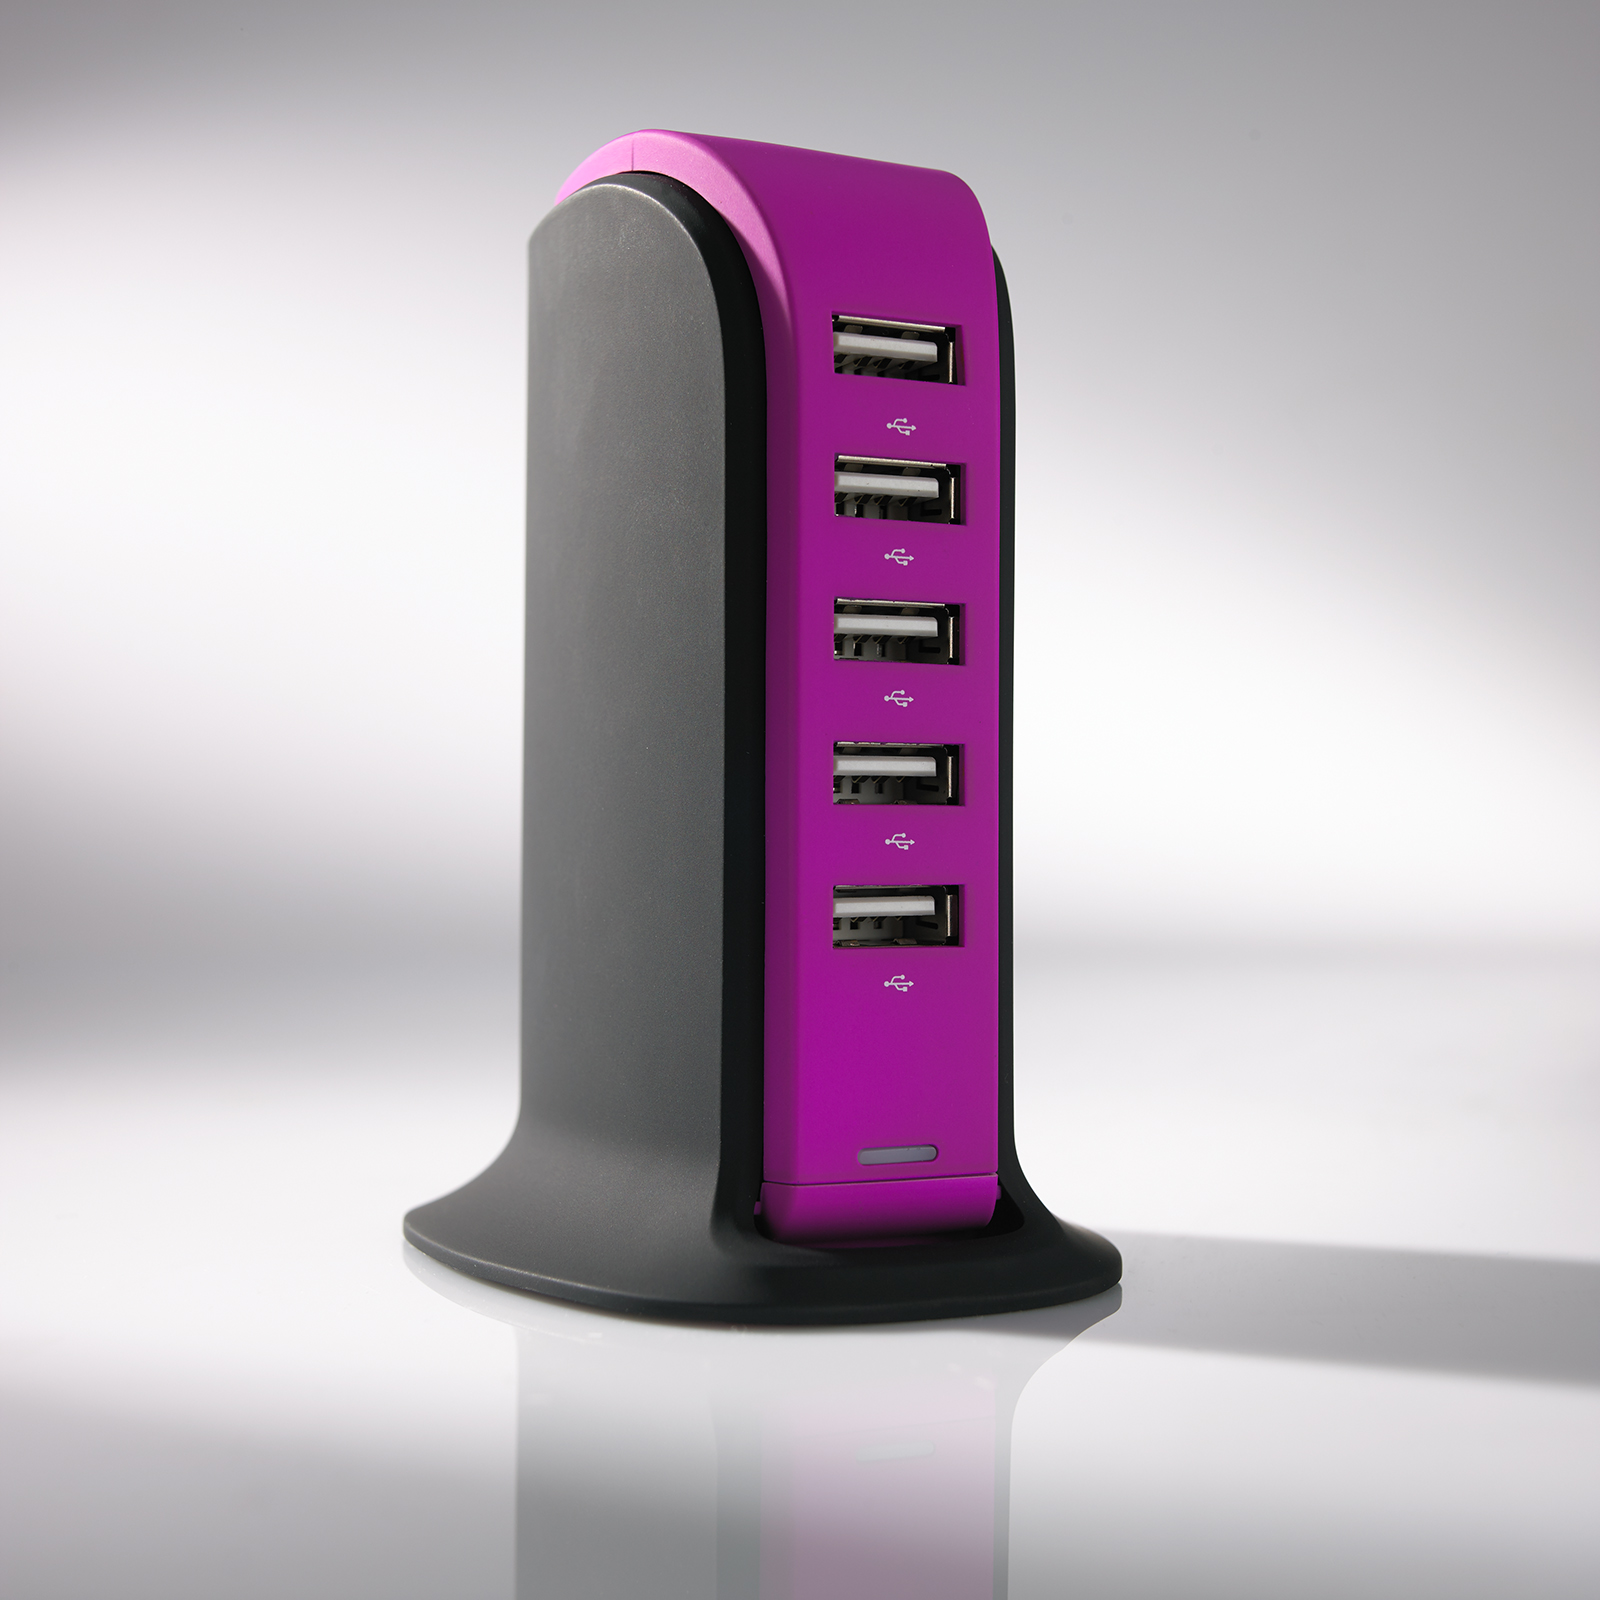 Promo 5 USB CHARGER TOWER PAINTURISSIMO